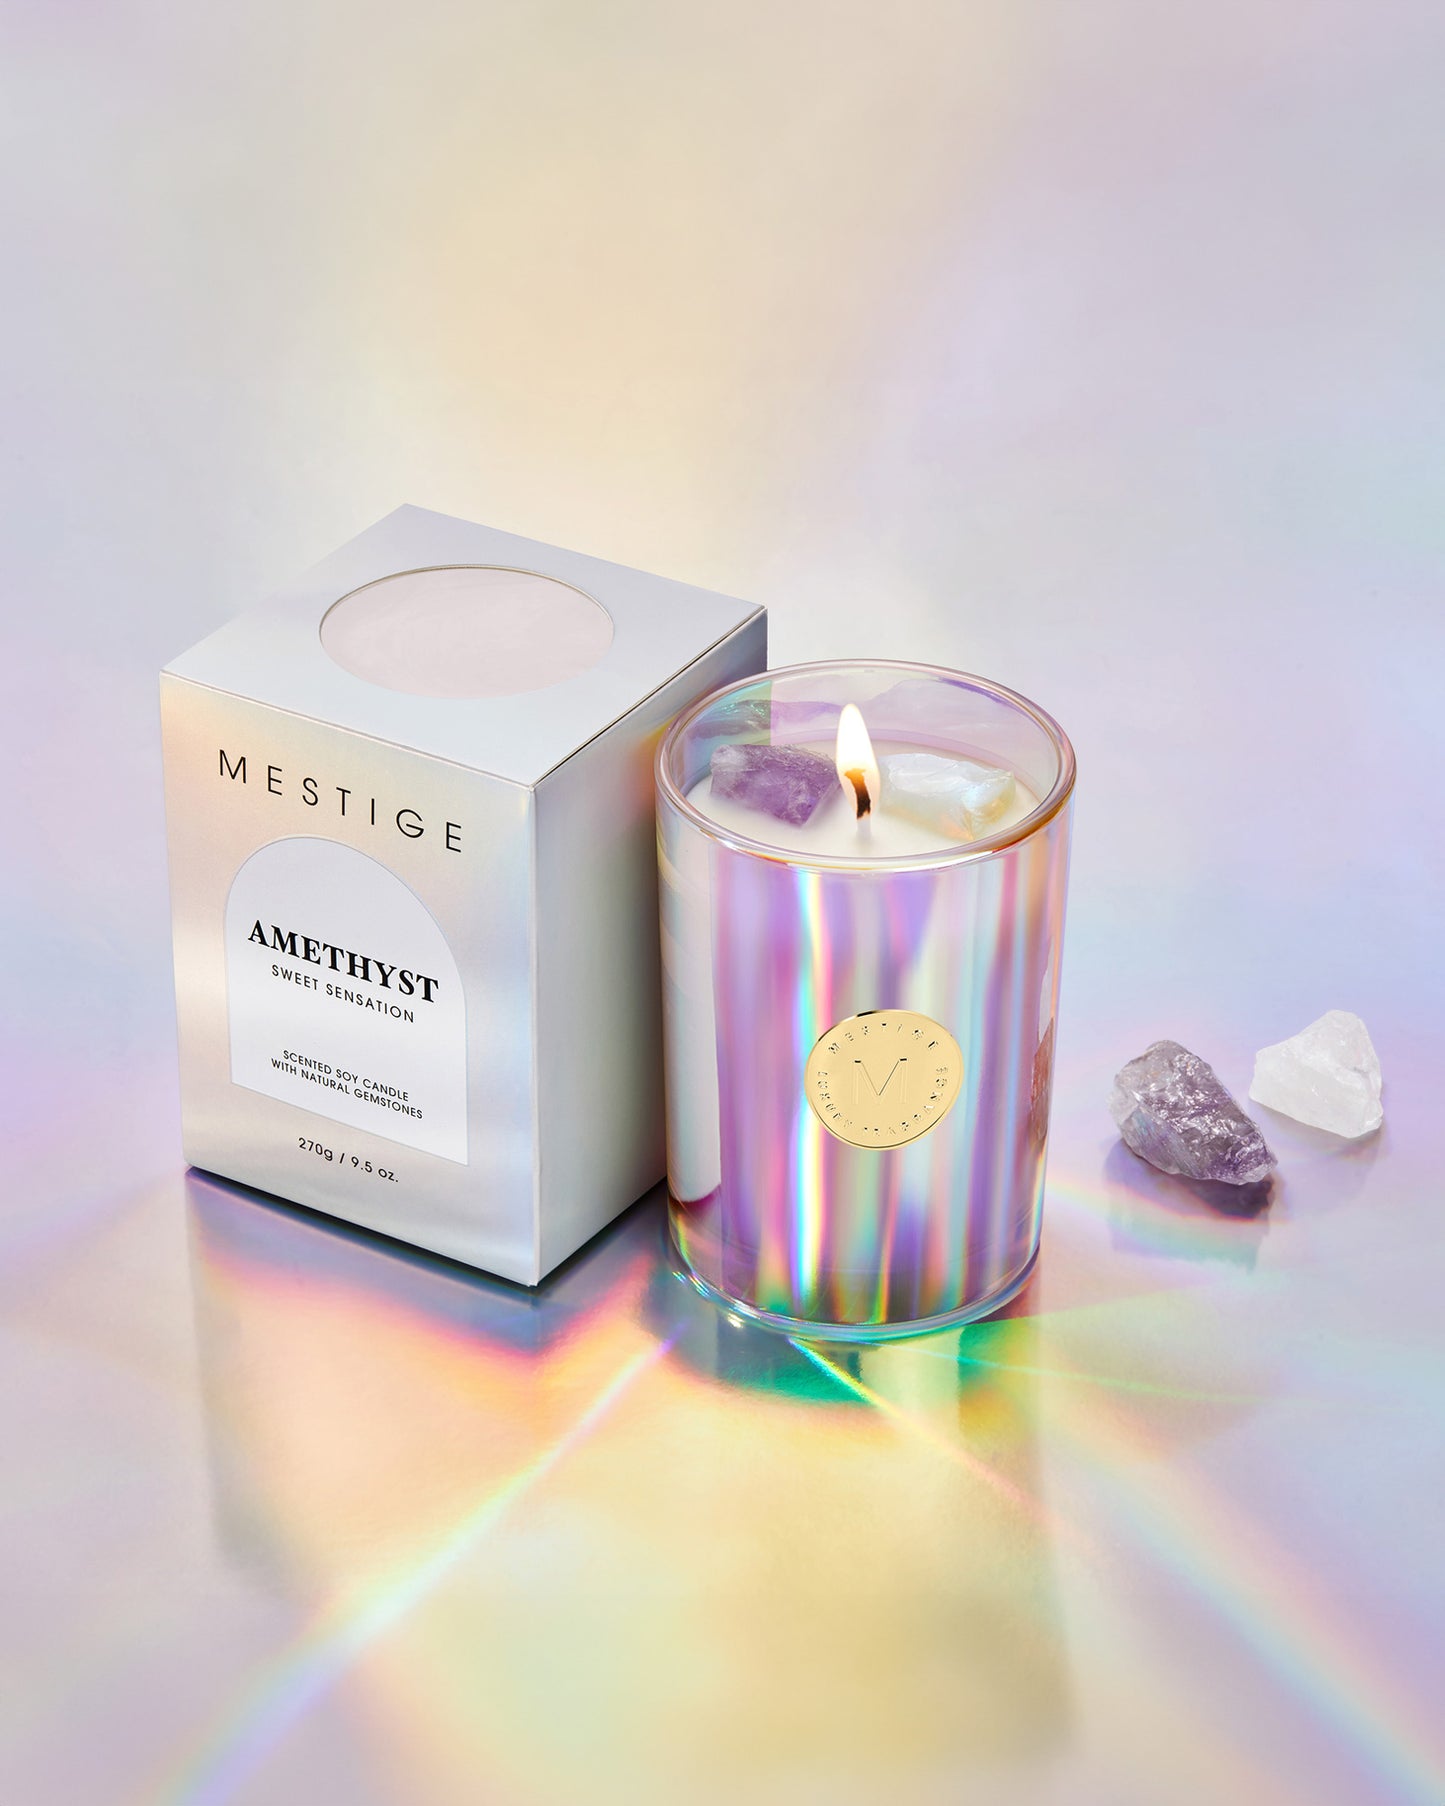 Galaxy Infused with Amethyst and Opalite Gemstone Soy Candle